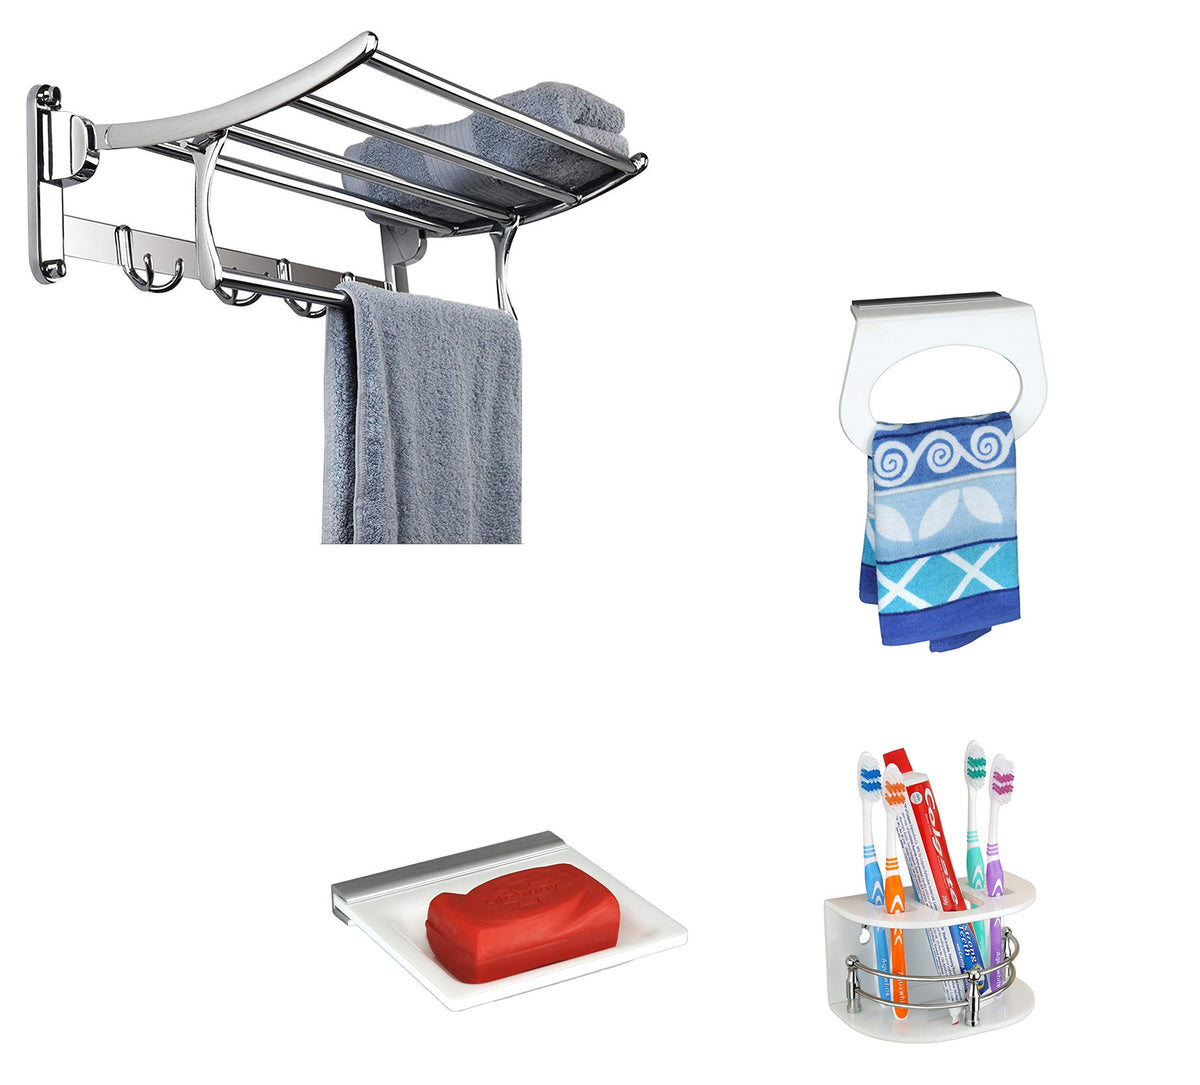 Plantex Stainless Steel Folding Towel Rack/Towel Stand/Hanger (24 Inches) with Premium Acrylic Toothbrush Holder/Soap Dish/Napkin Ring/Bathroom Accessories for Home